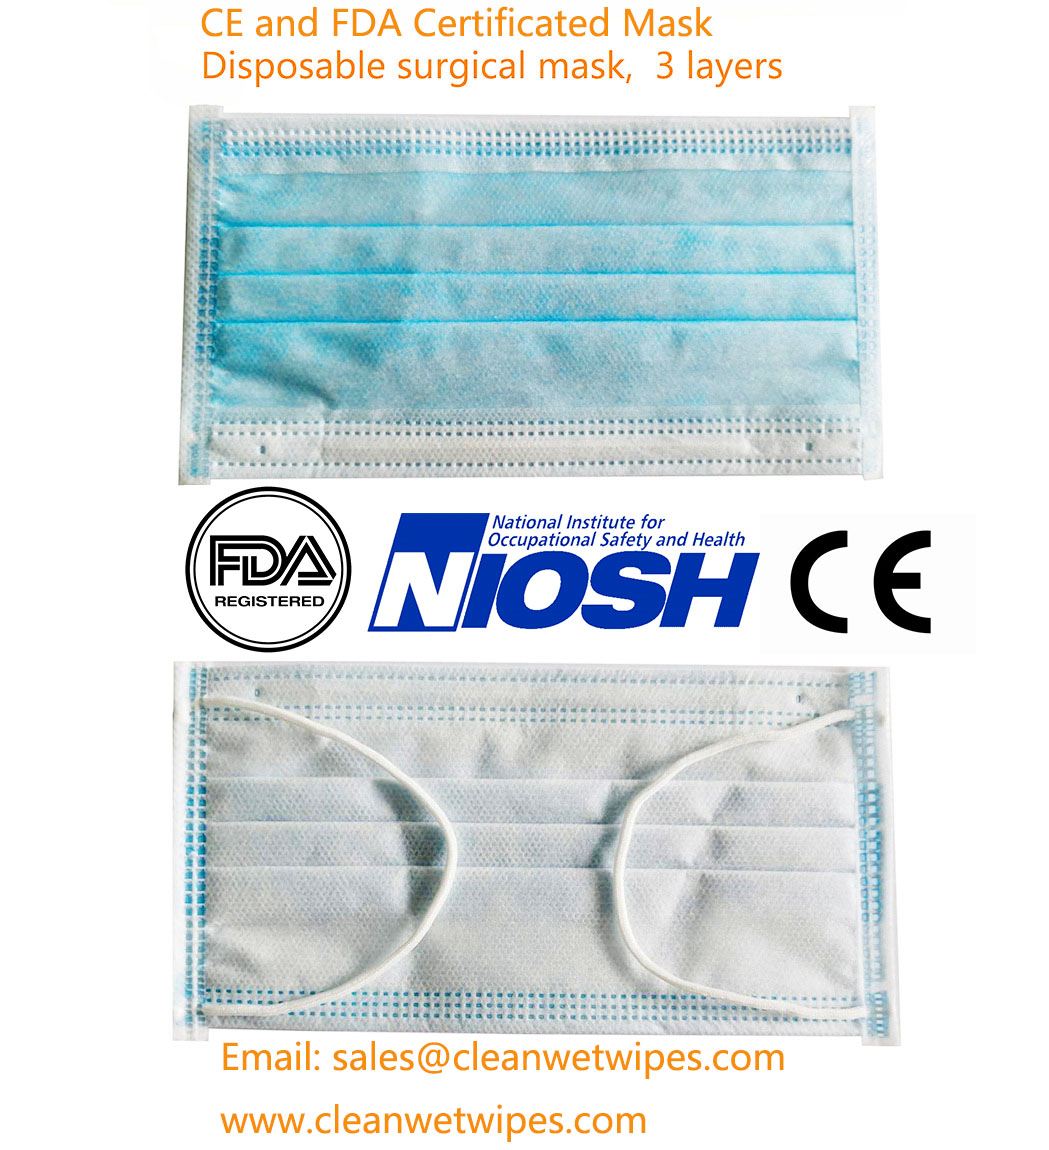 FDA and CE certificated surgical face mask